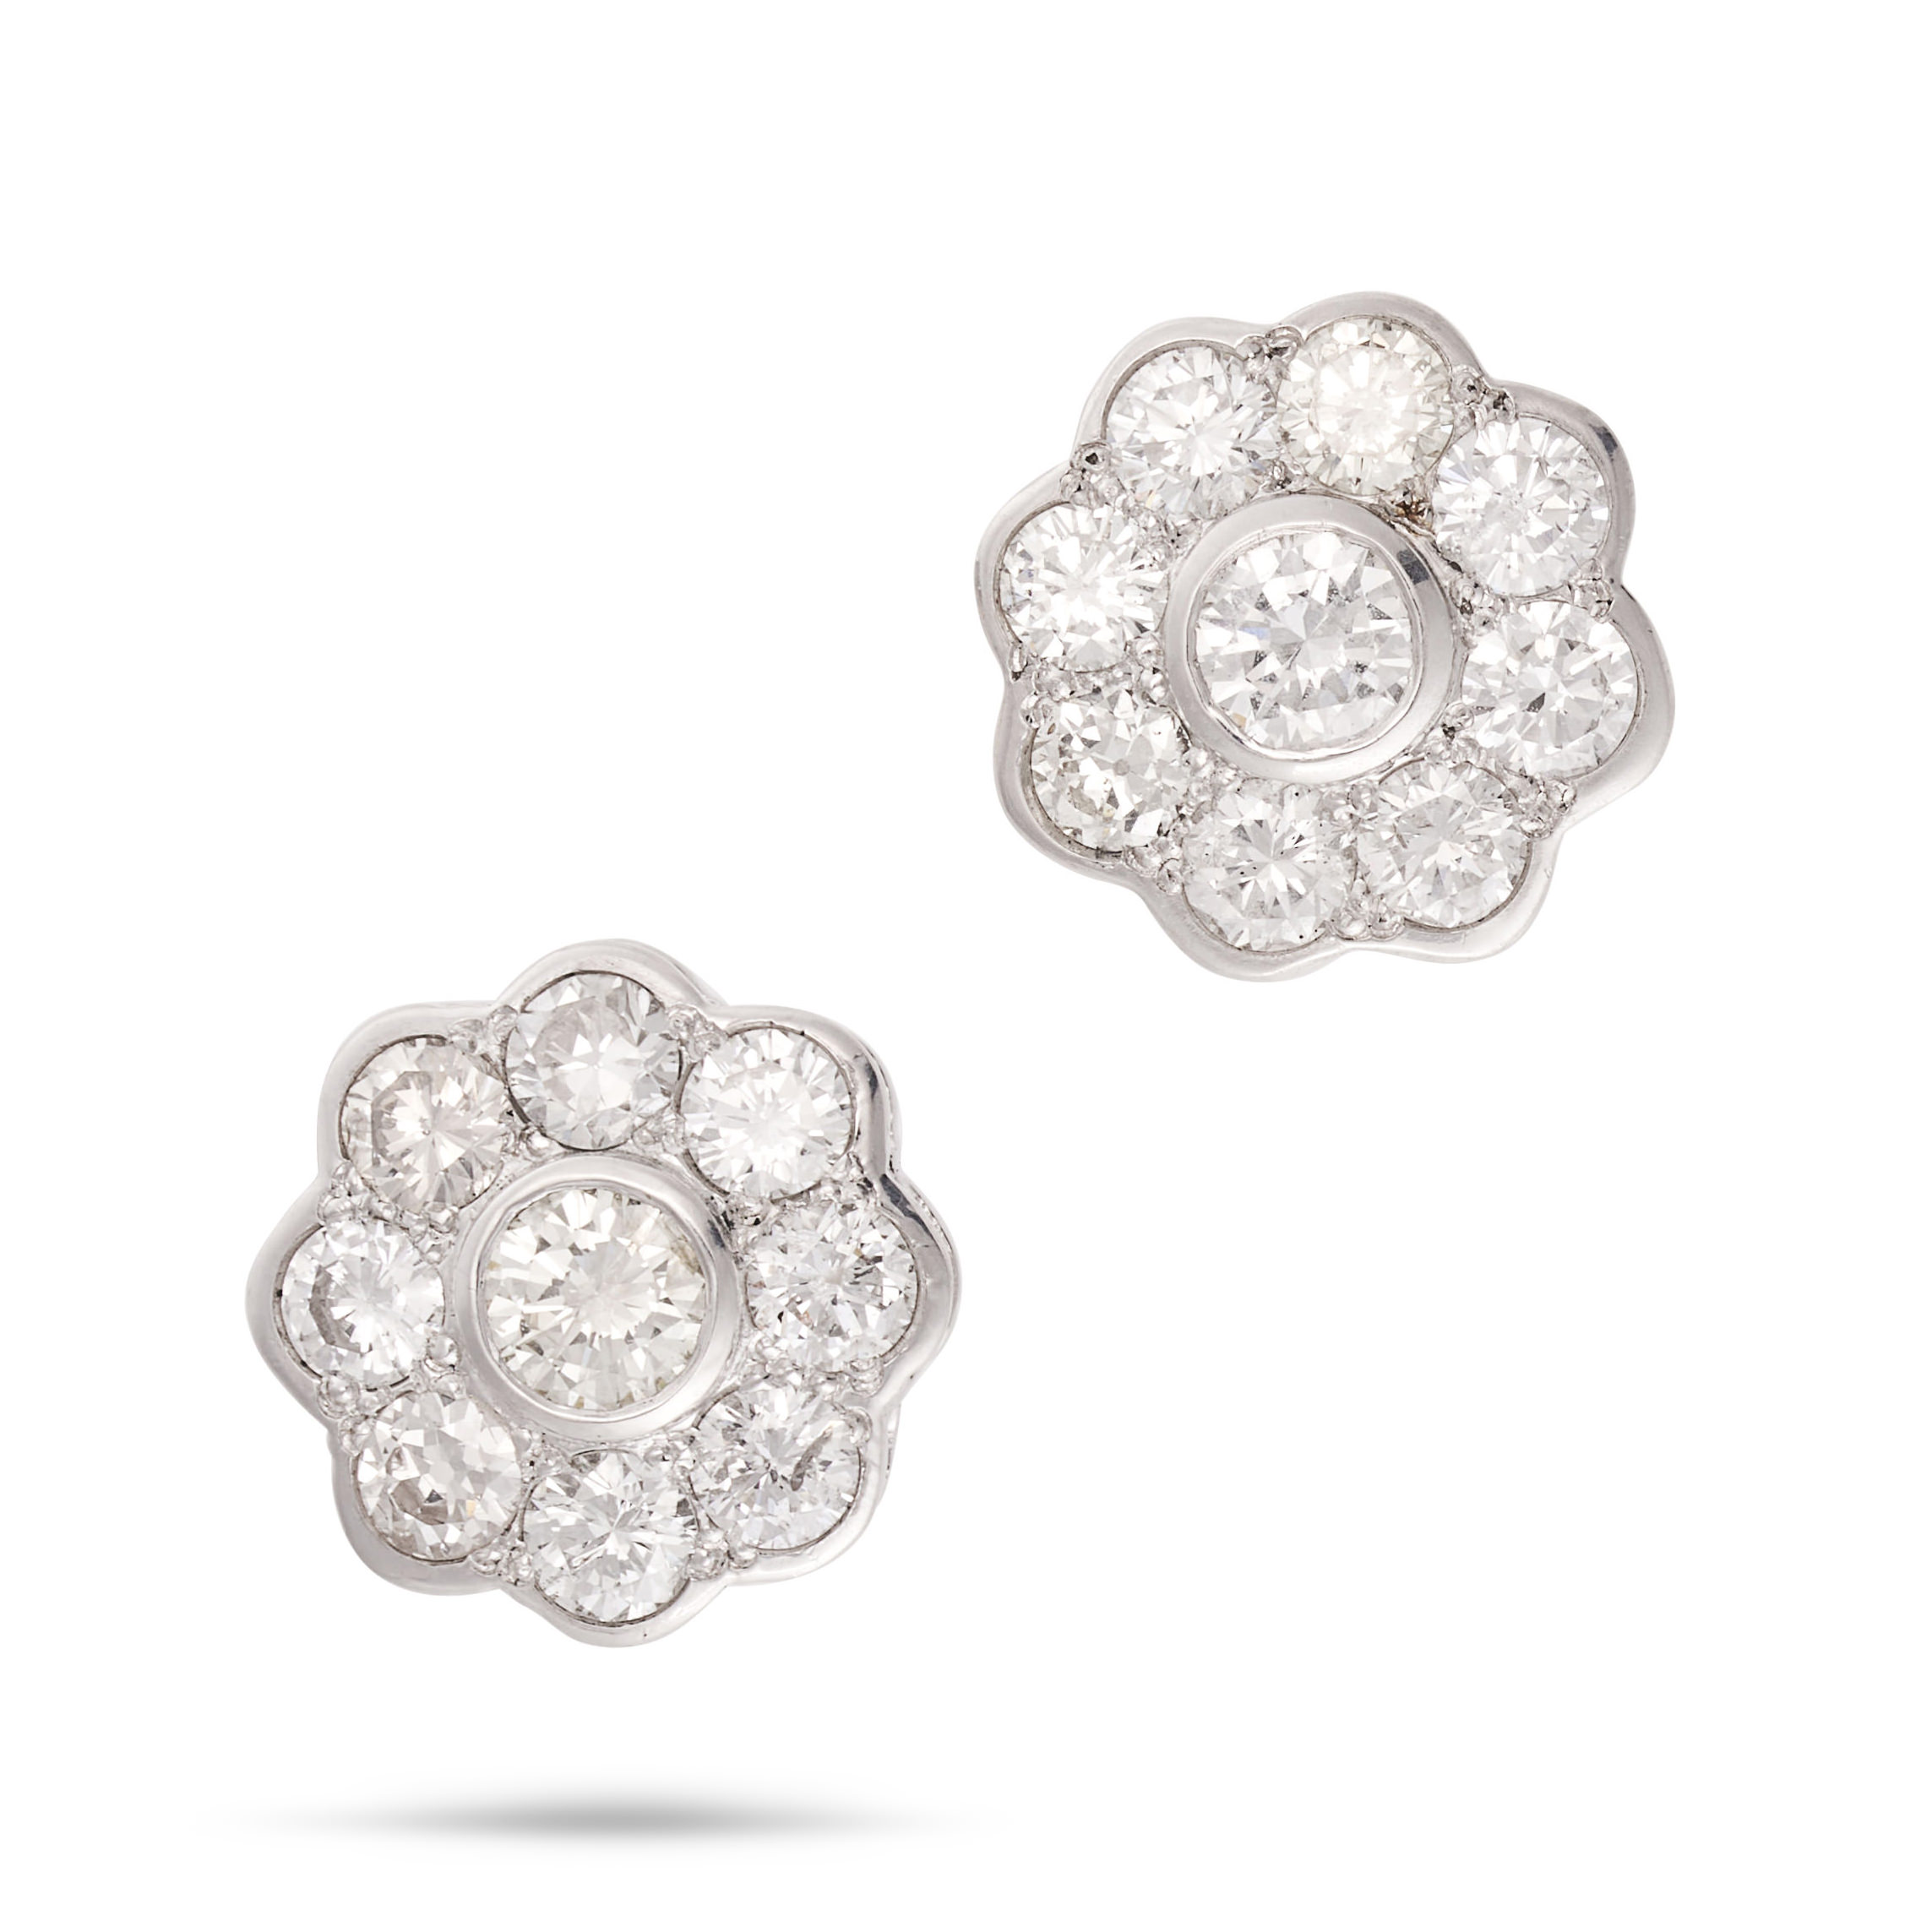 A PAIR OF DIAMOND CLUSTER EARRINGS each set with a cluster of round brilliant cut diamonds, the d...